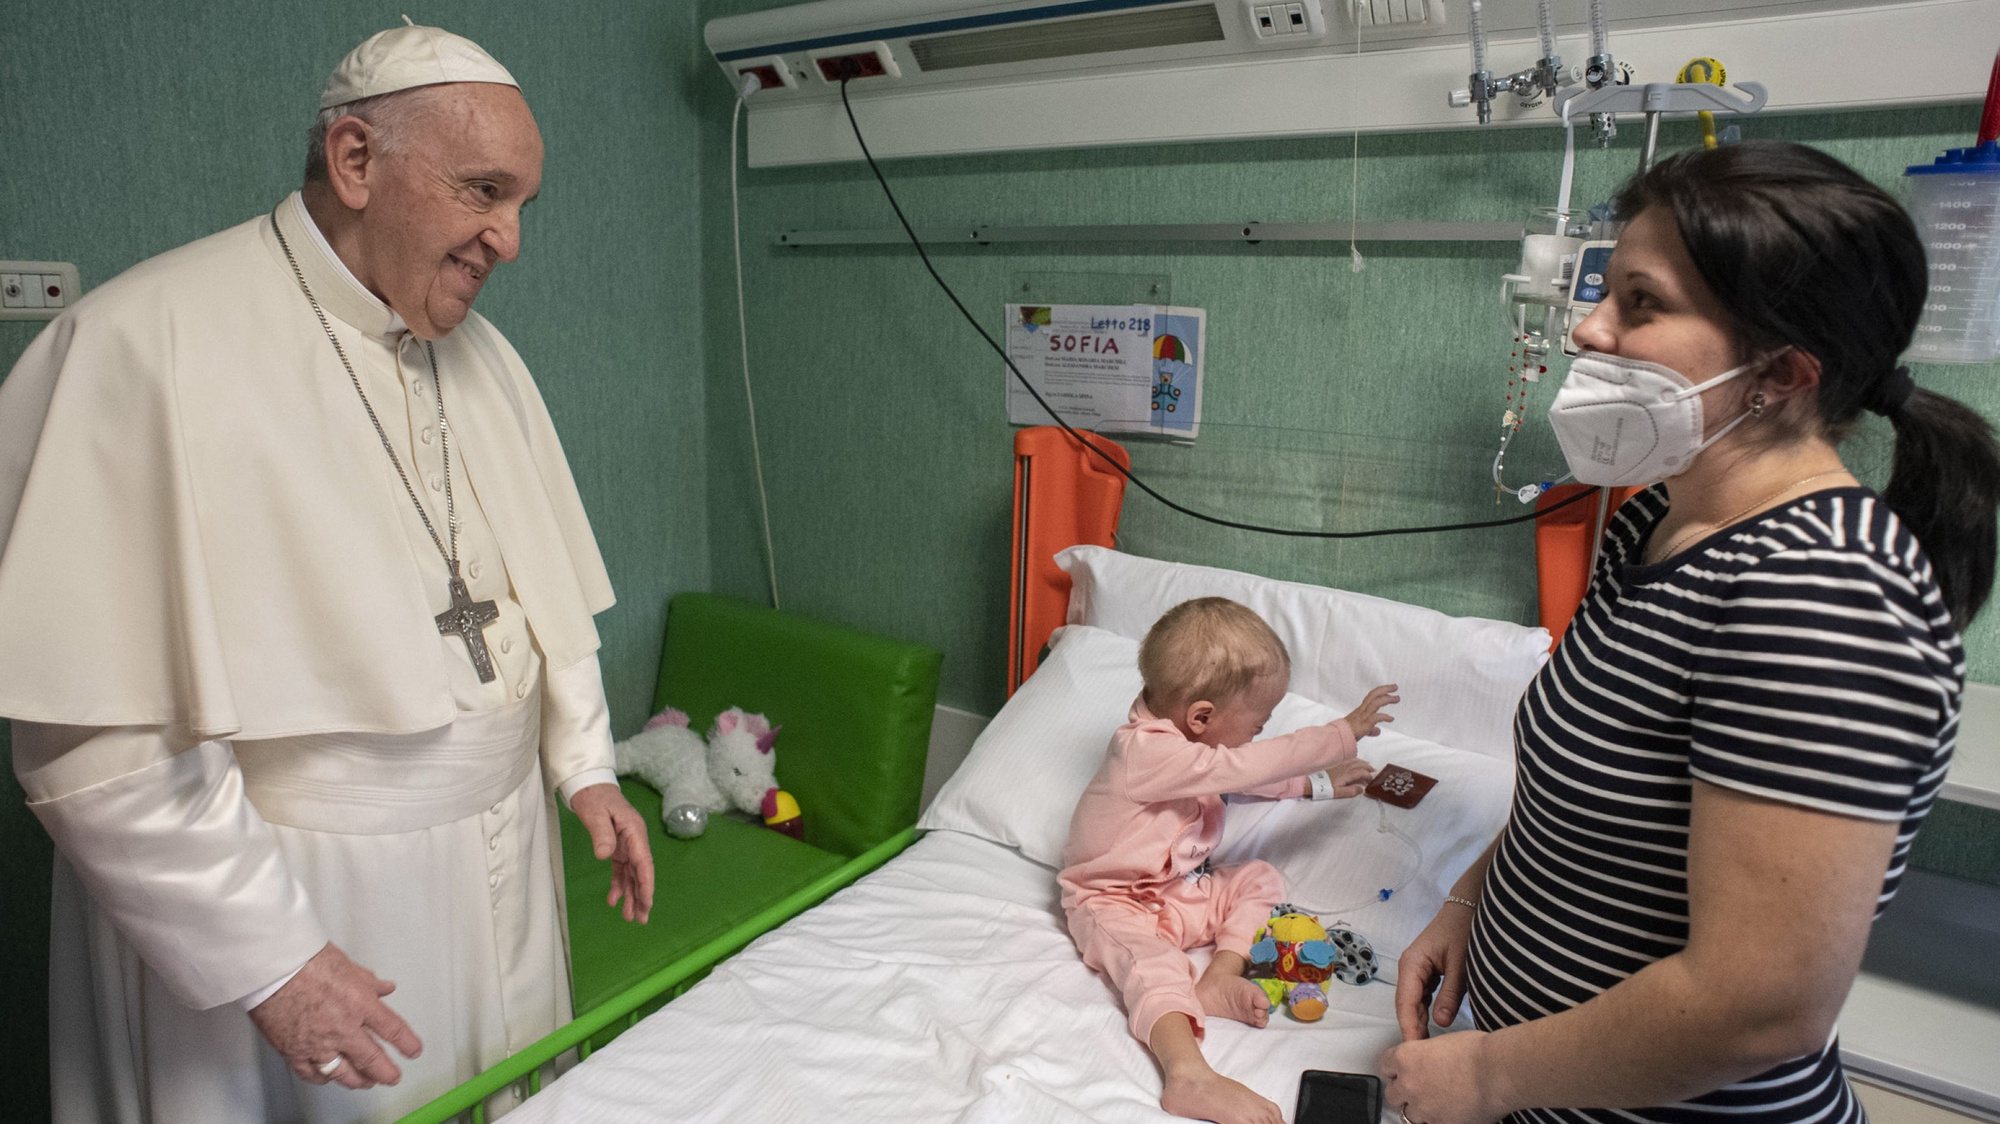 epa09836340 A handout picture provided by the Vatican Media shows Pope Francis at the Bambino Gesu Pediatric Hospital to visit the ward where the hospitalized children who arrived from Ukraine in recent days are staying, in Rome, Italy, 19 March 2022.  EPA/VATICAN MEDIA HANDOUT  HANDOUT EDITORIAL USE ONLY/NO SALES